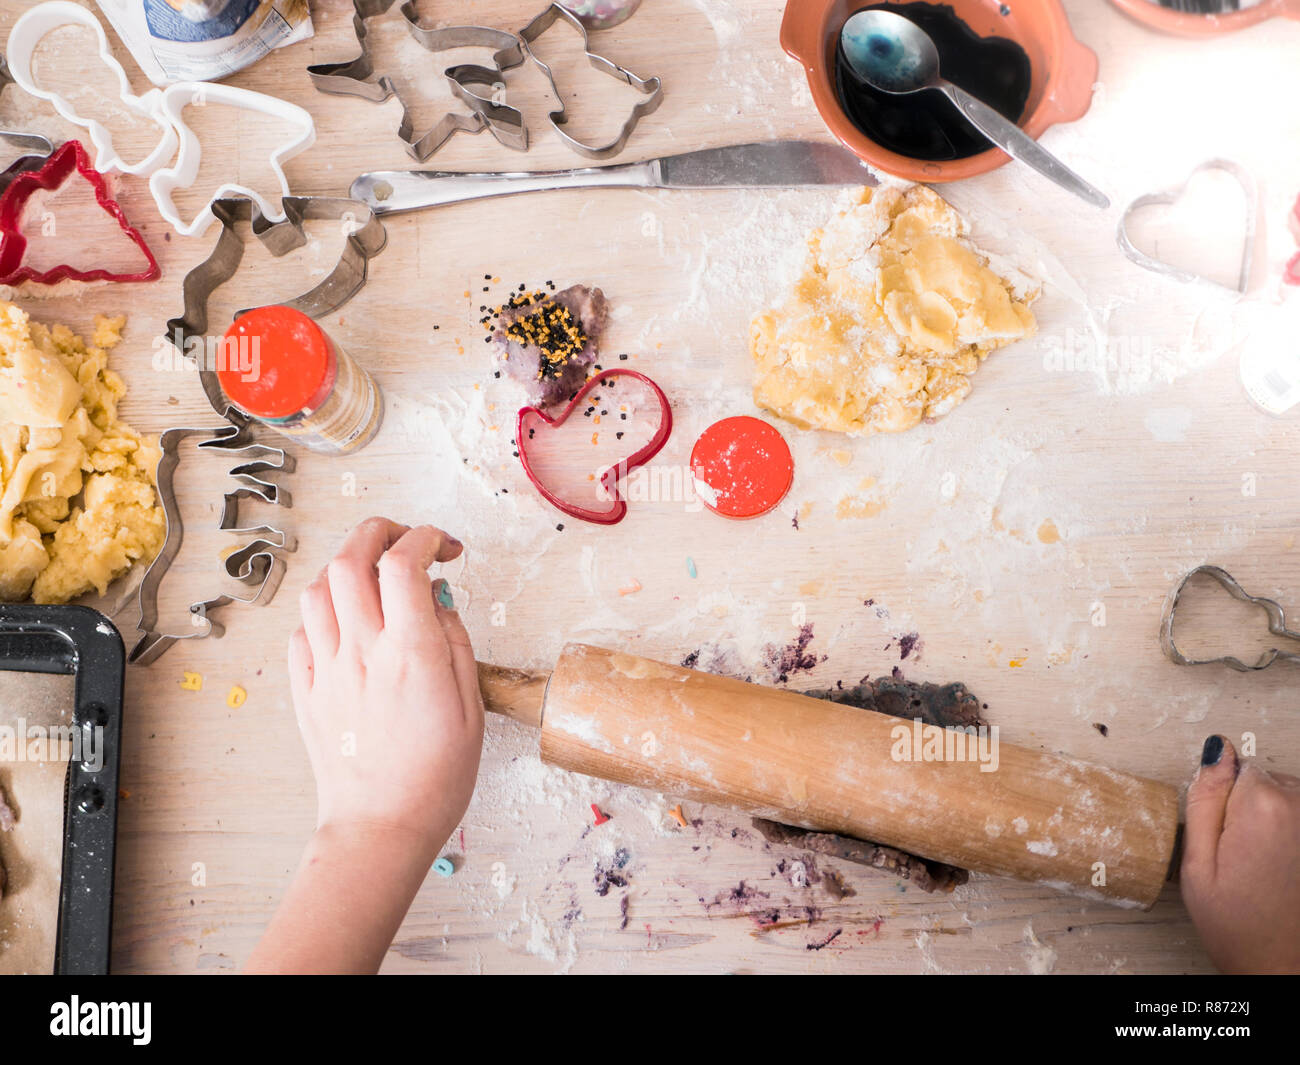 Christmas Bakery Little Girl Rolling Cookie Dough Top View With Different Baking Supplies Stock Photo Alamy